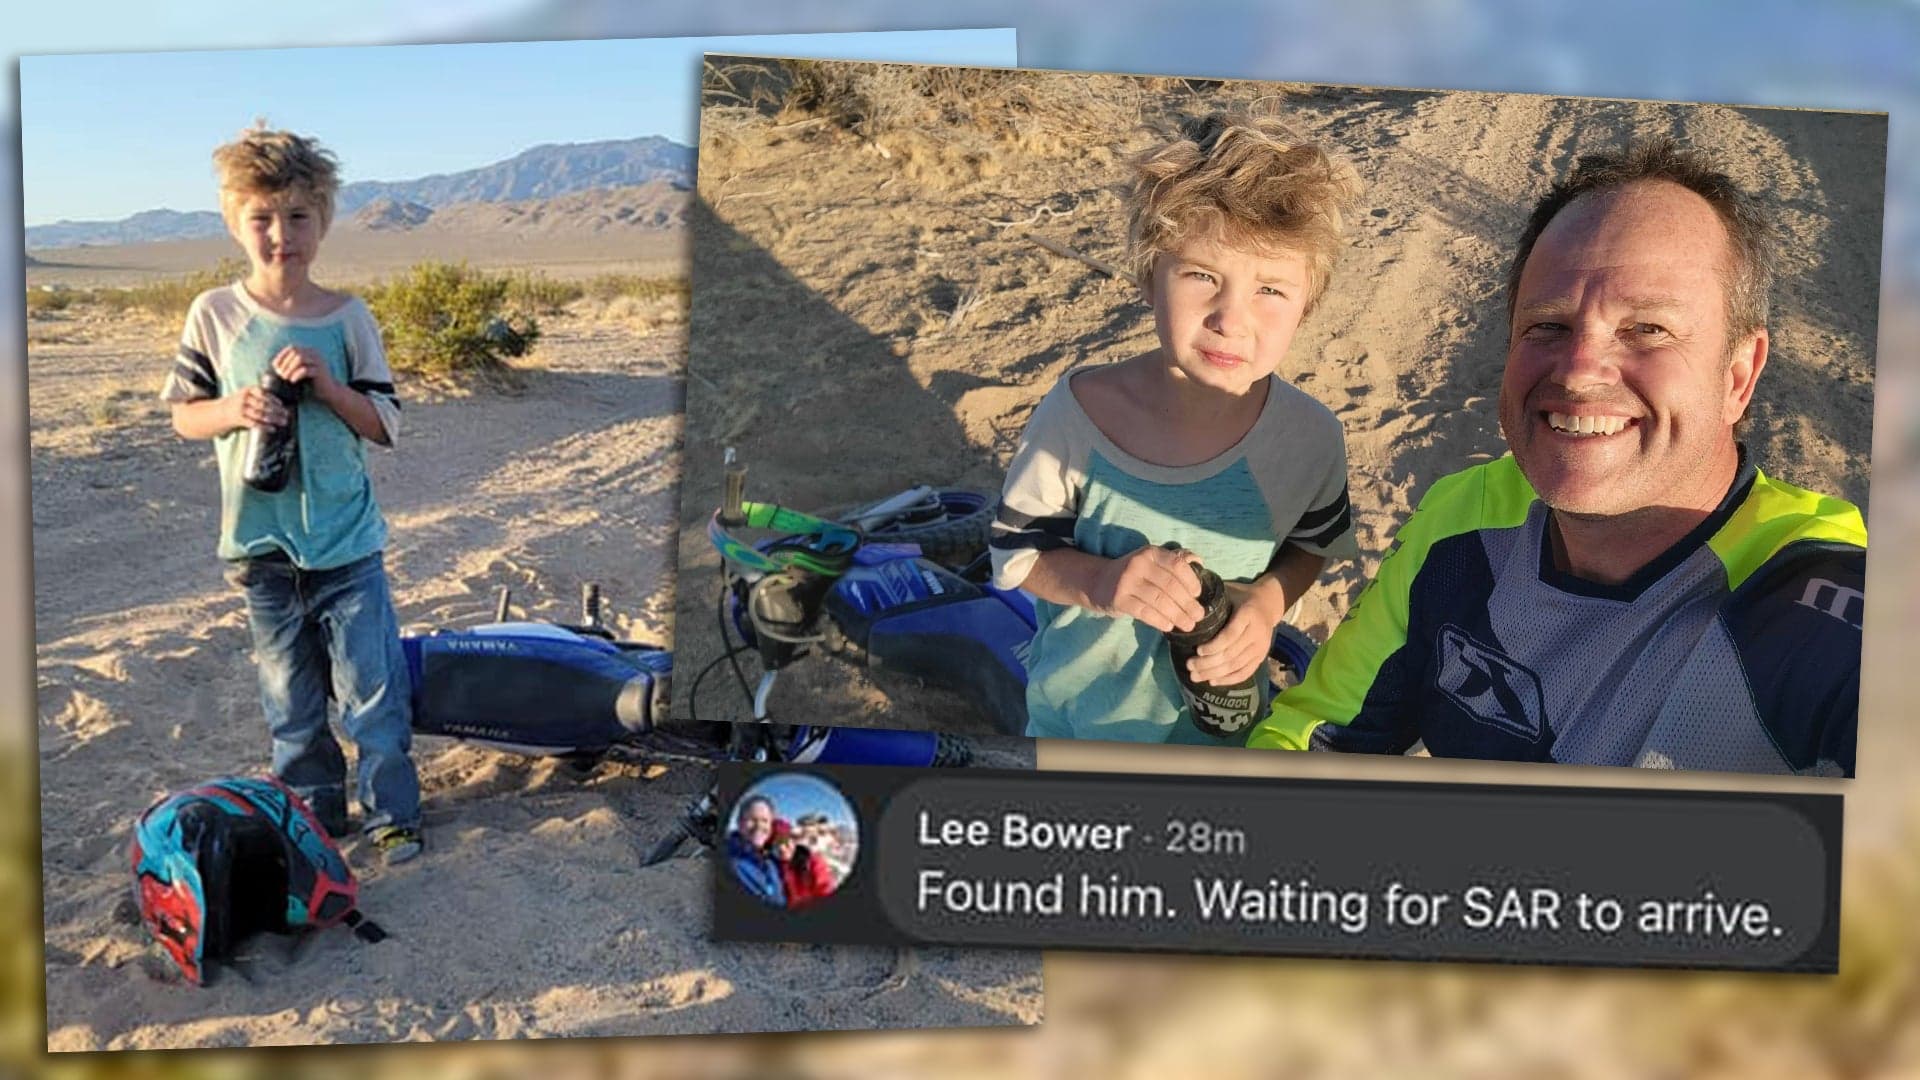 Off-Road Recovery Facebook Groups Help Find 5-Year-Old Missing in Mojave Desert